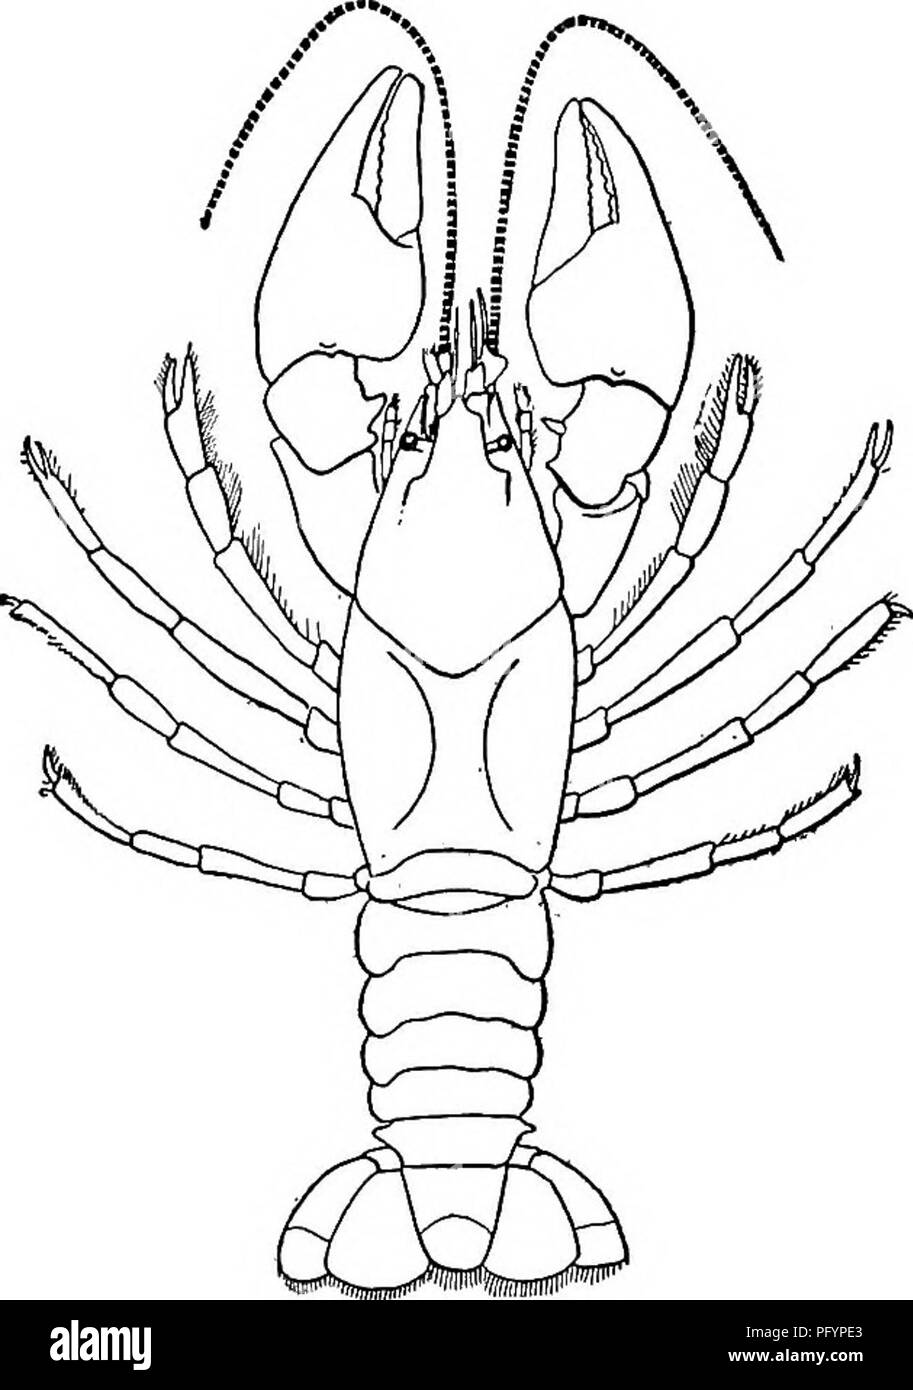 Fresh-water biology. Freshwater biology. HIGHER CRUSTACEANS (MALACOSTRACA)  847 36 (35) Male copulatory organs more or less complex. Some peraeopods of  the male with hooks on the ischiopodite. Female with receptaculum seminis (